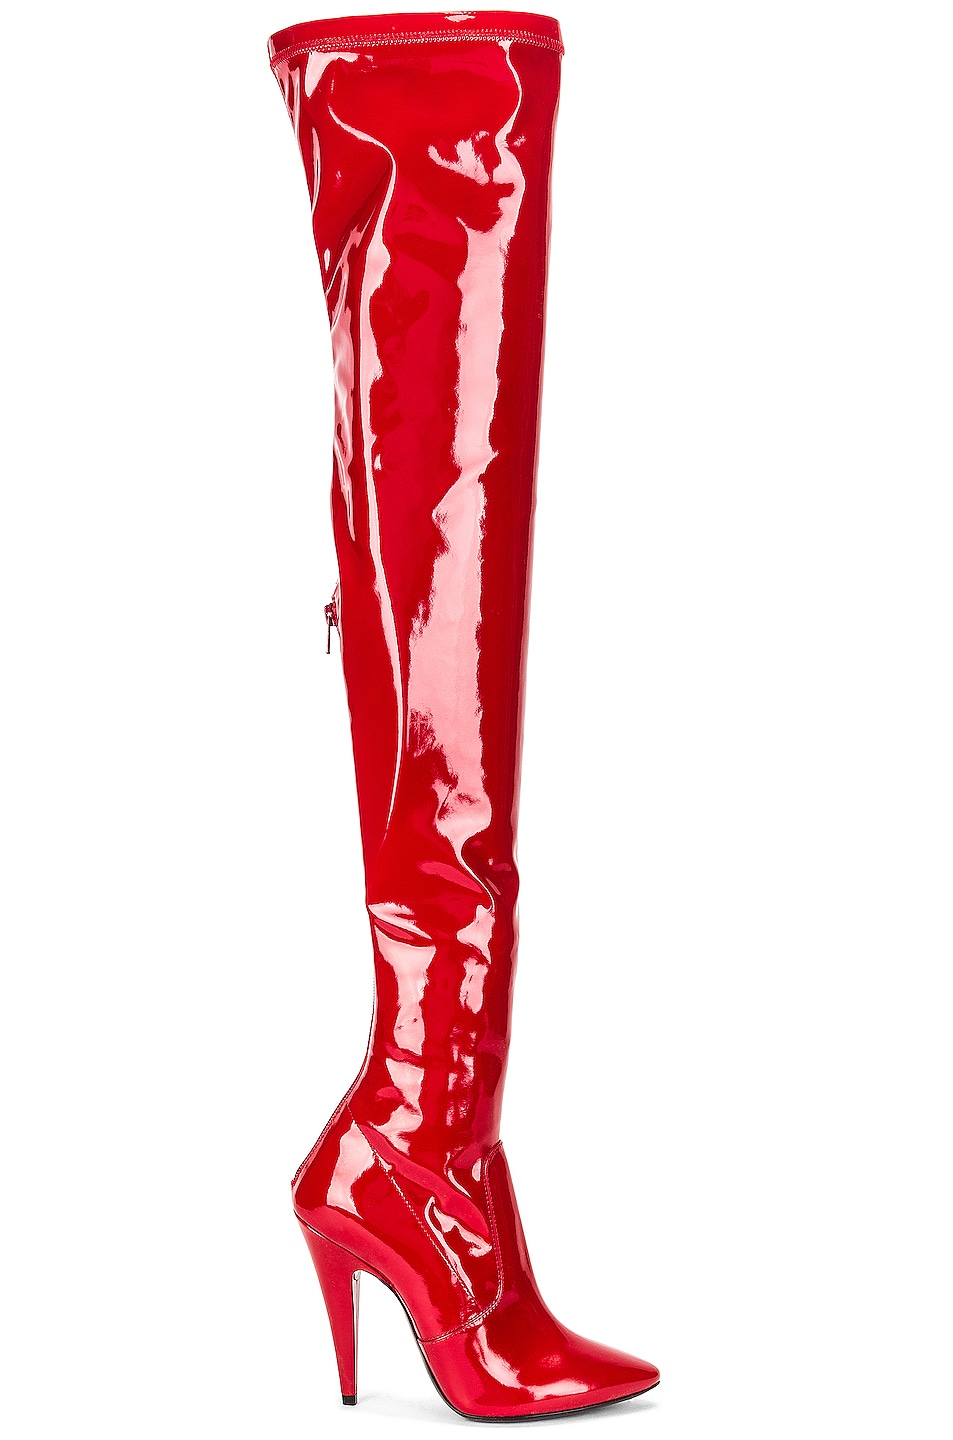 Saint Laurent Aylah Over the Knee Boots in Red | FWRD